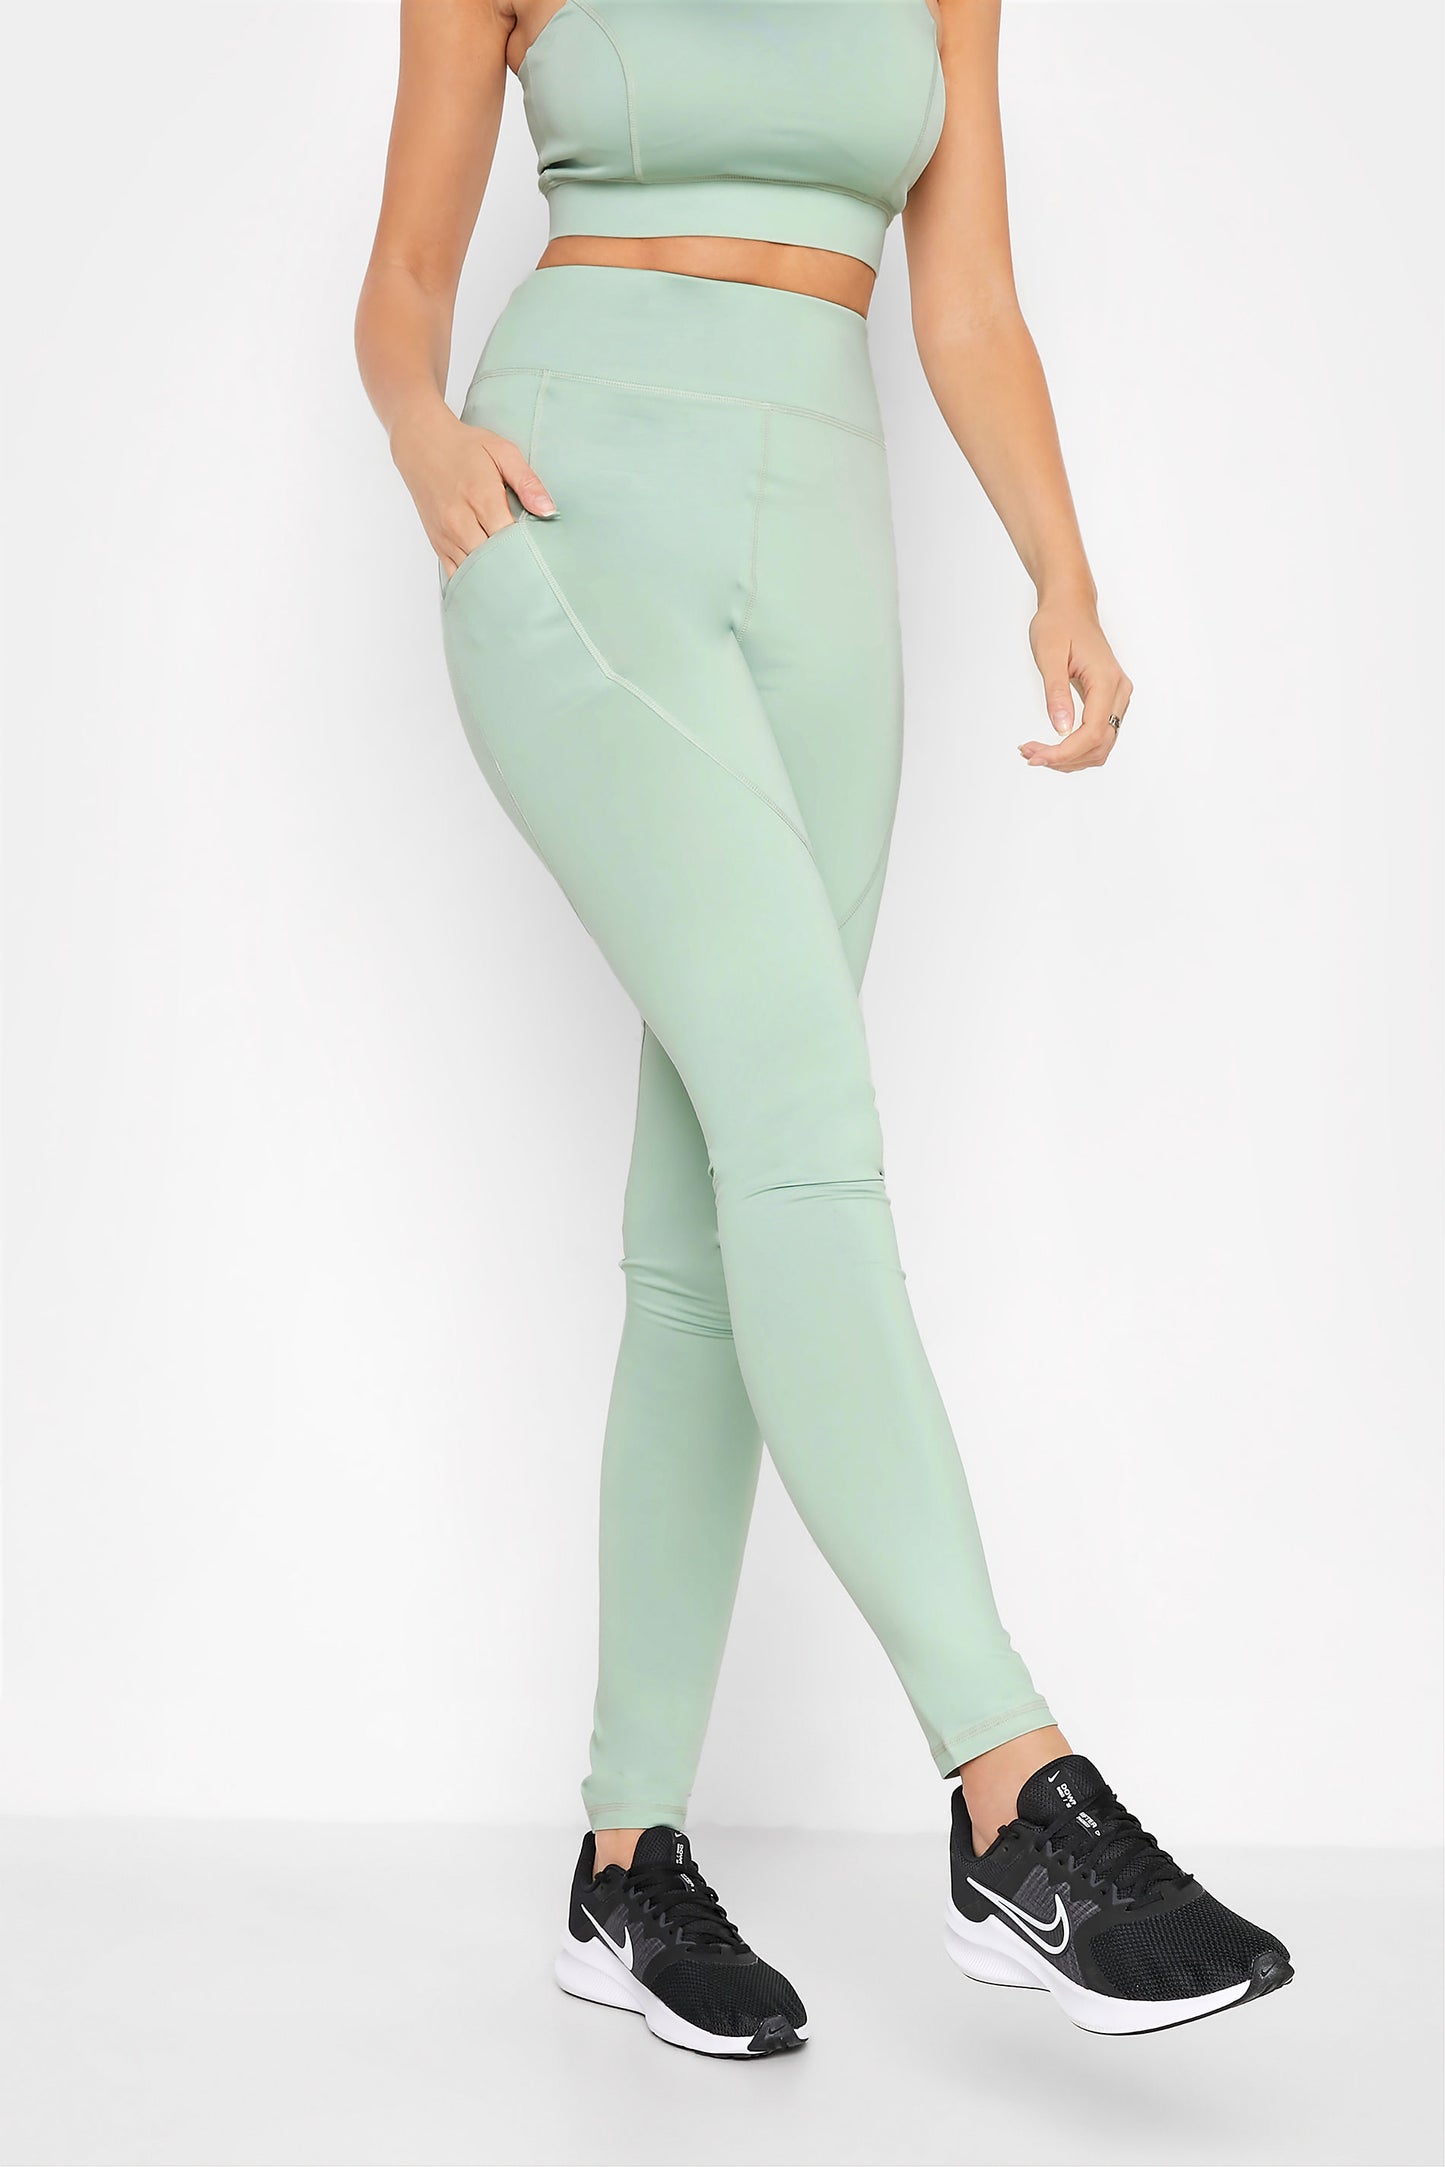 LTS ACTIVE Tall Sage Green Stretch High Waisted Gym Leggings